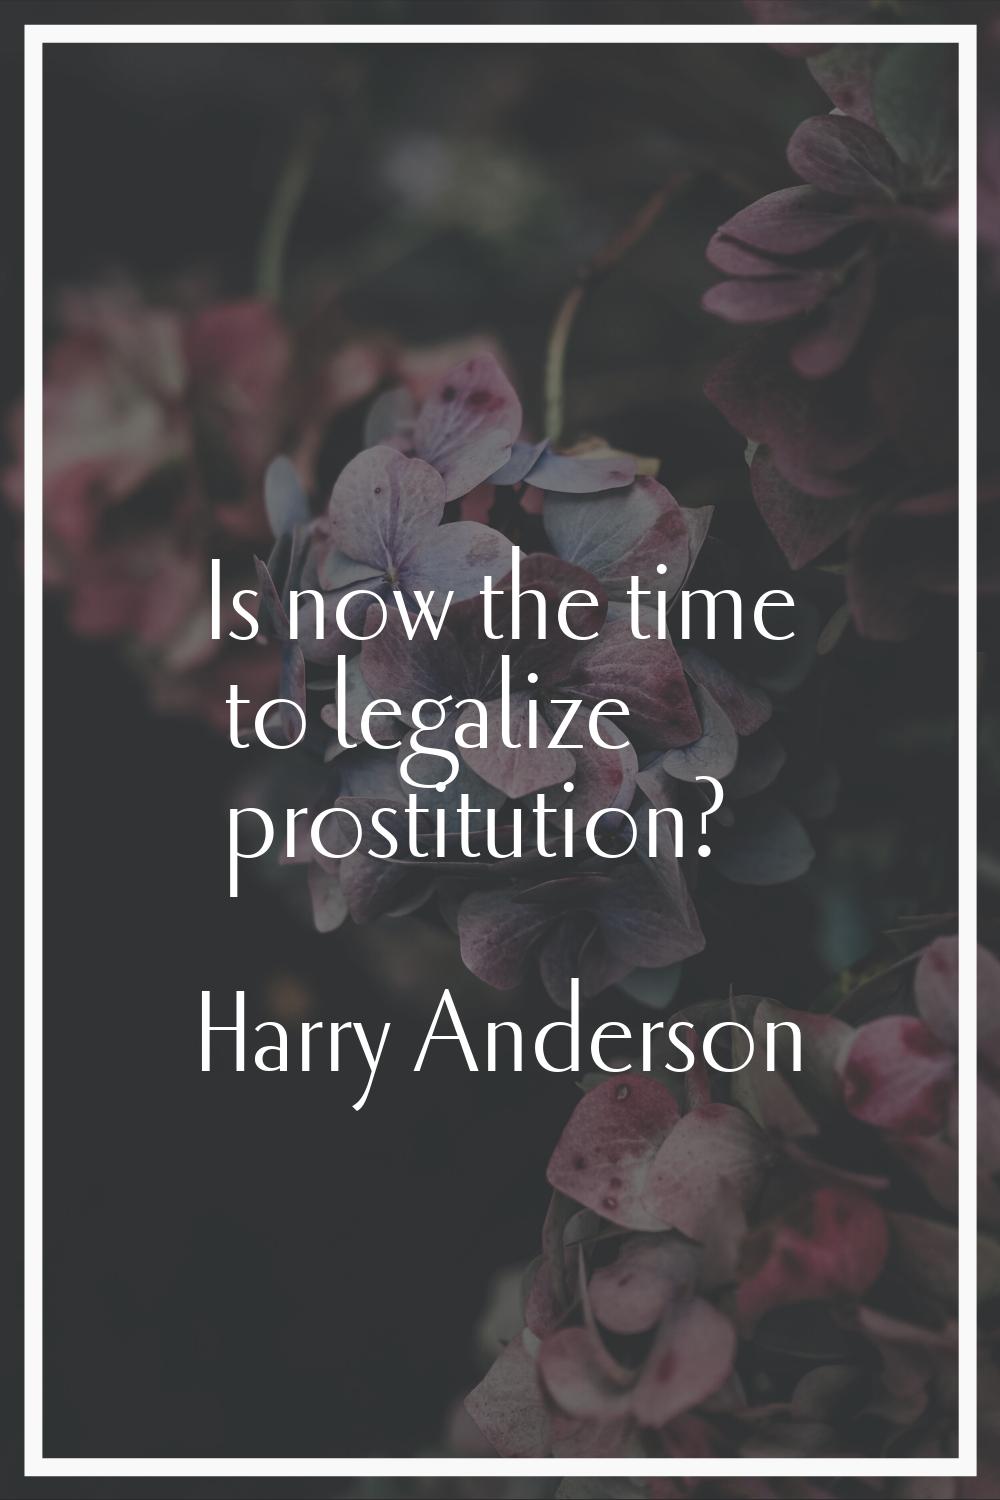 Is now the time to legalize prostitution?